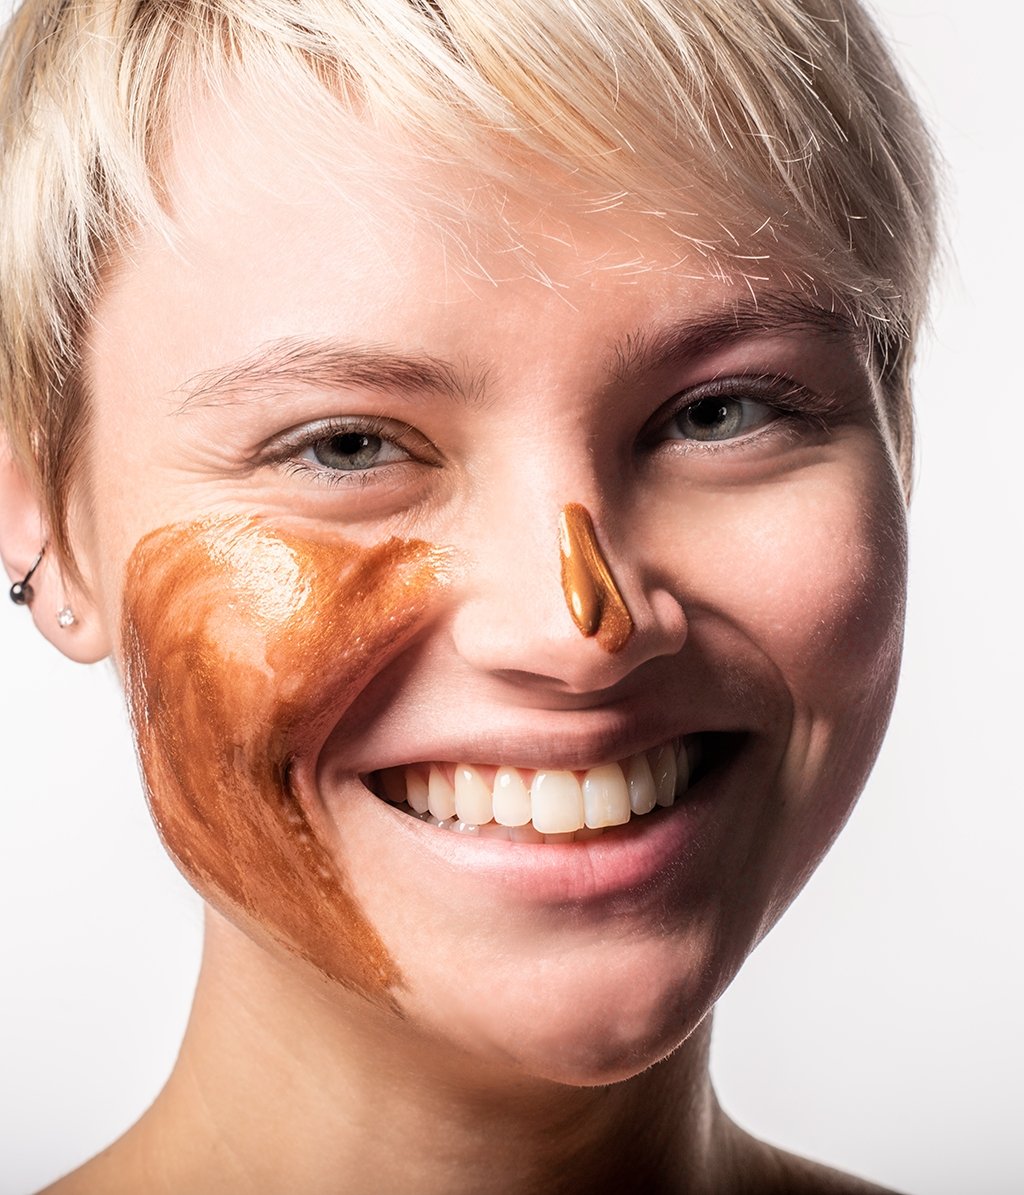 TAKE THE DRAMA Youth Boosting Copper Peel Off Mask – Hey Honey Beauty